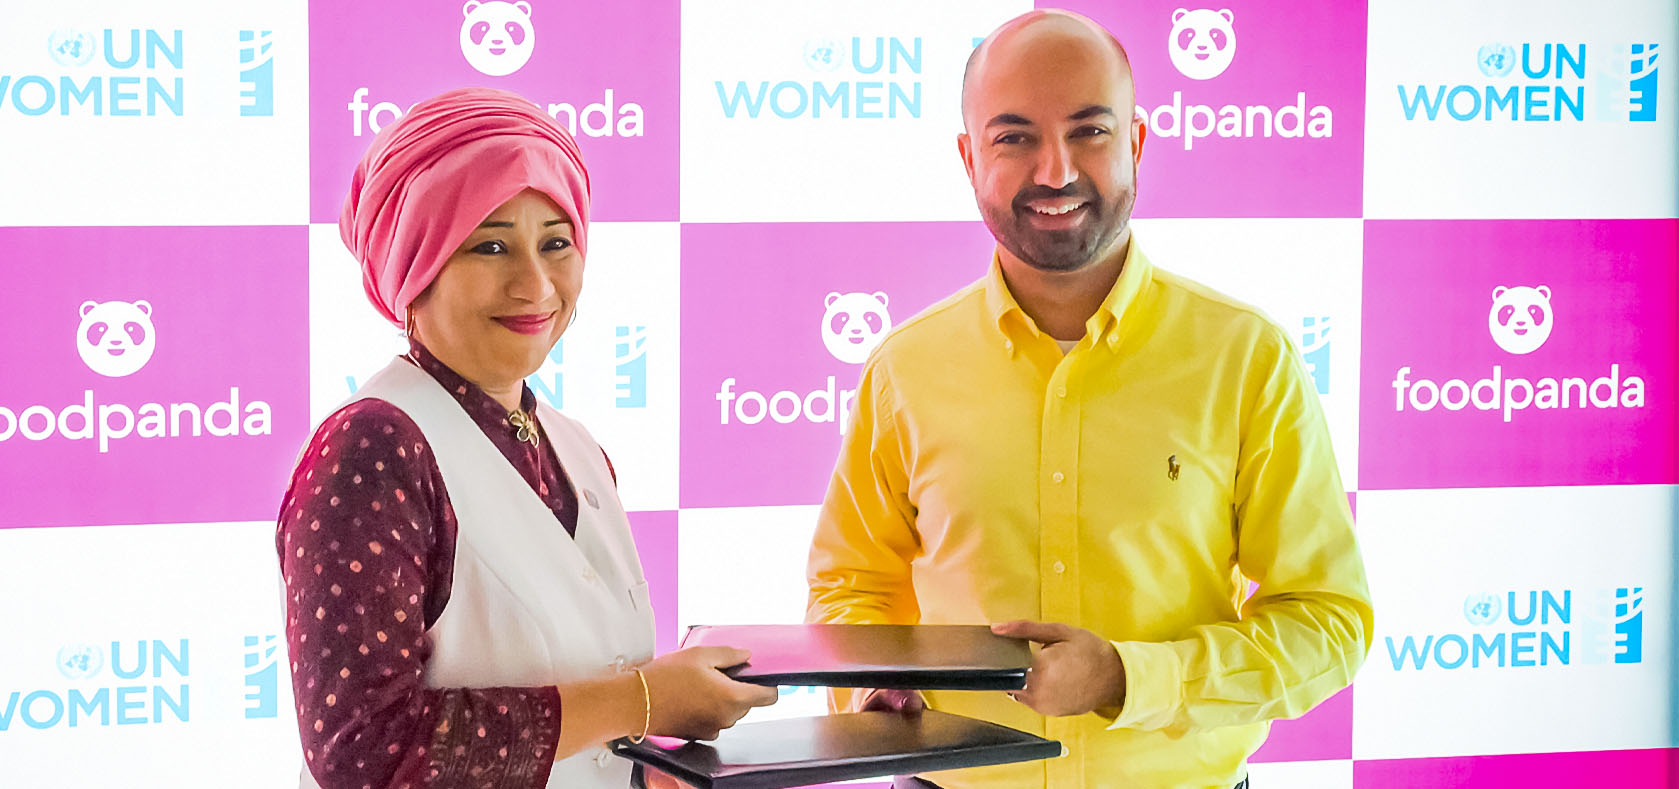 Sharmeela Rassool, Country Representative, UN Women Pakistan and Munteqa Peracha, Managing Director, foodpanda exchanging the signed agreement to promotion of workplace safety and gender equality for women. Photo: UN Women/Hassan Abbasi